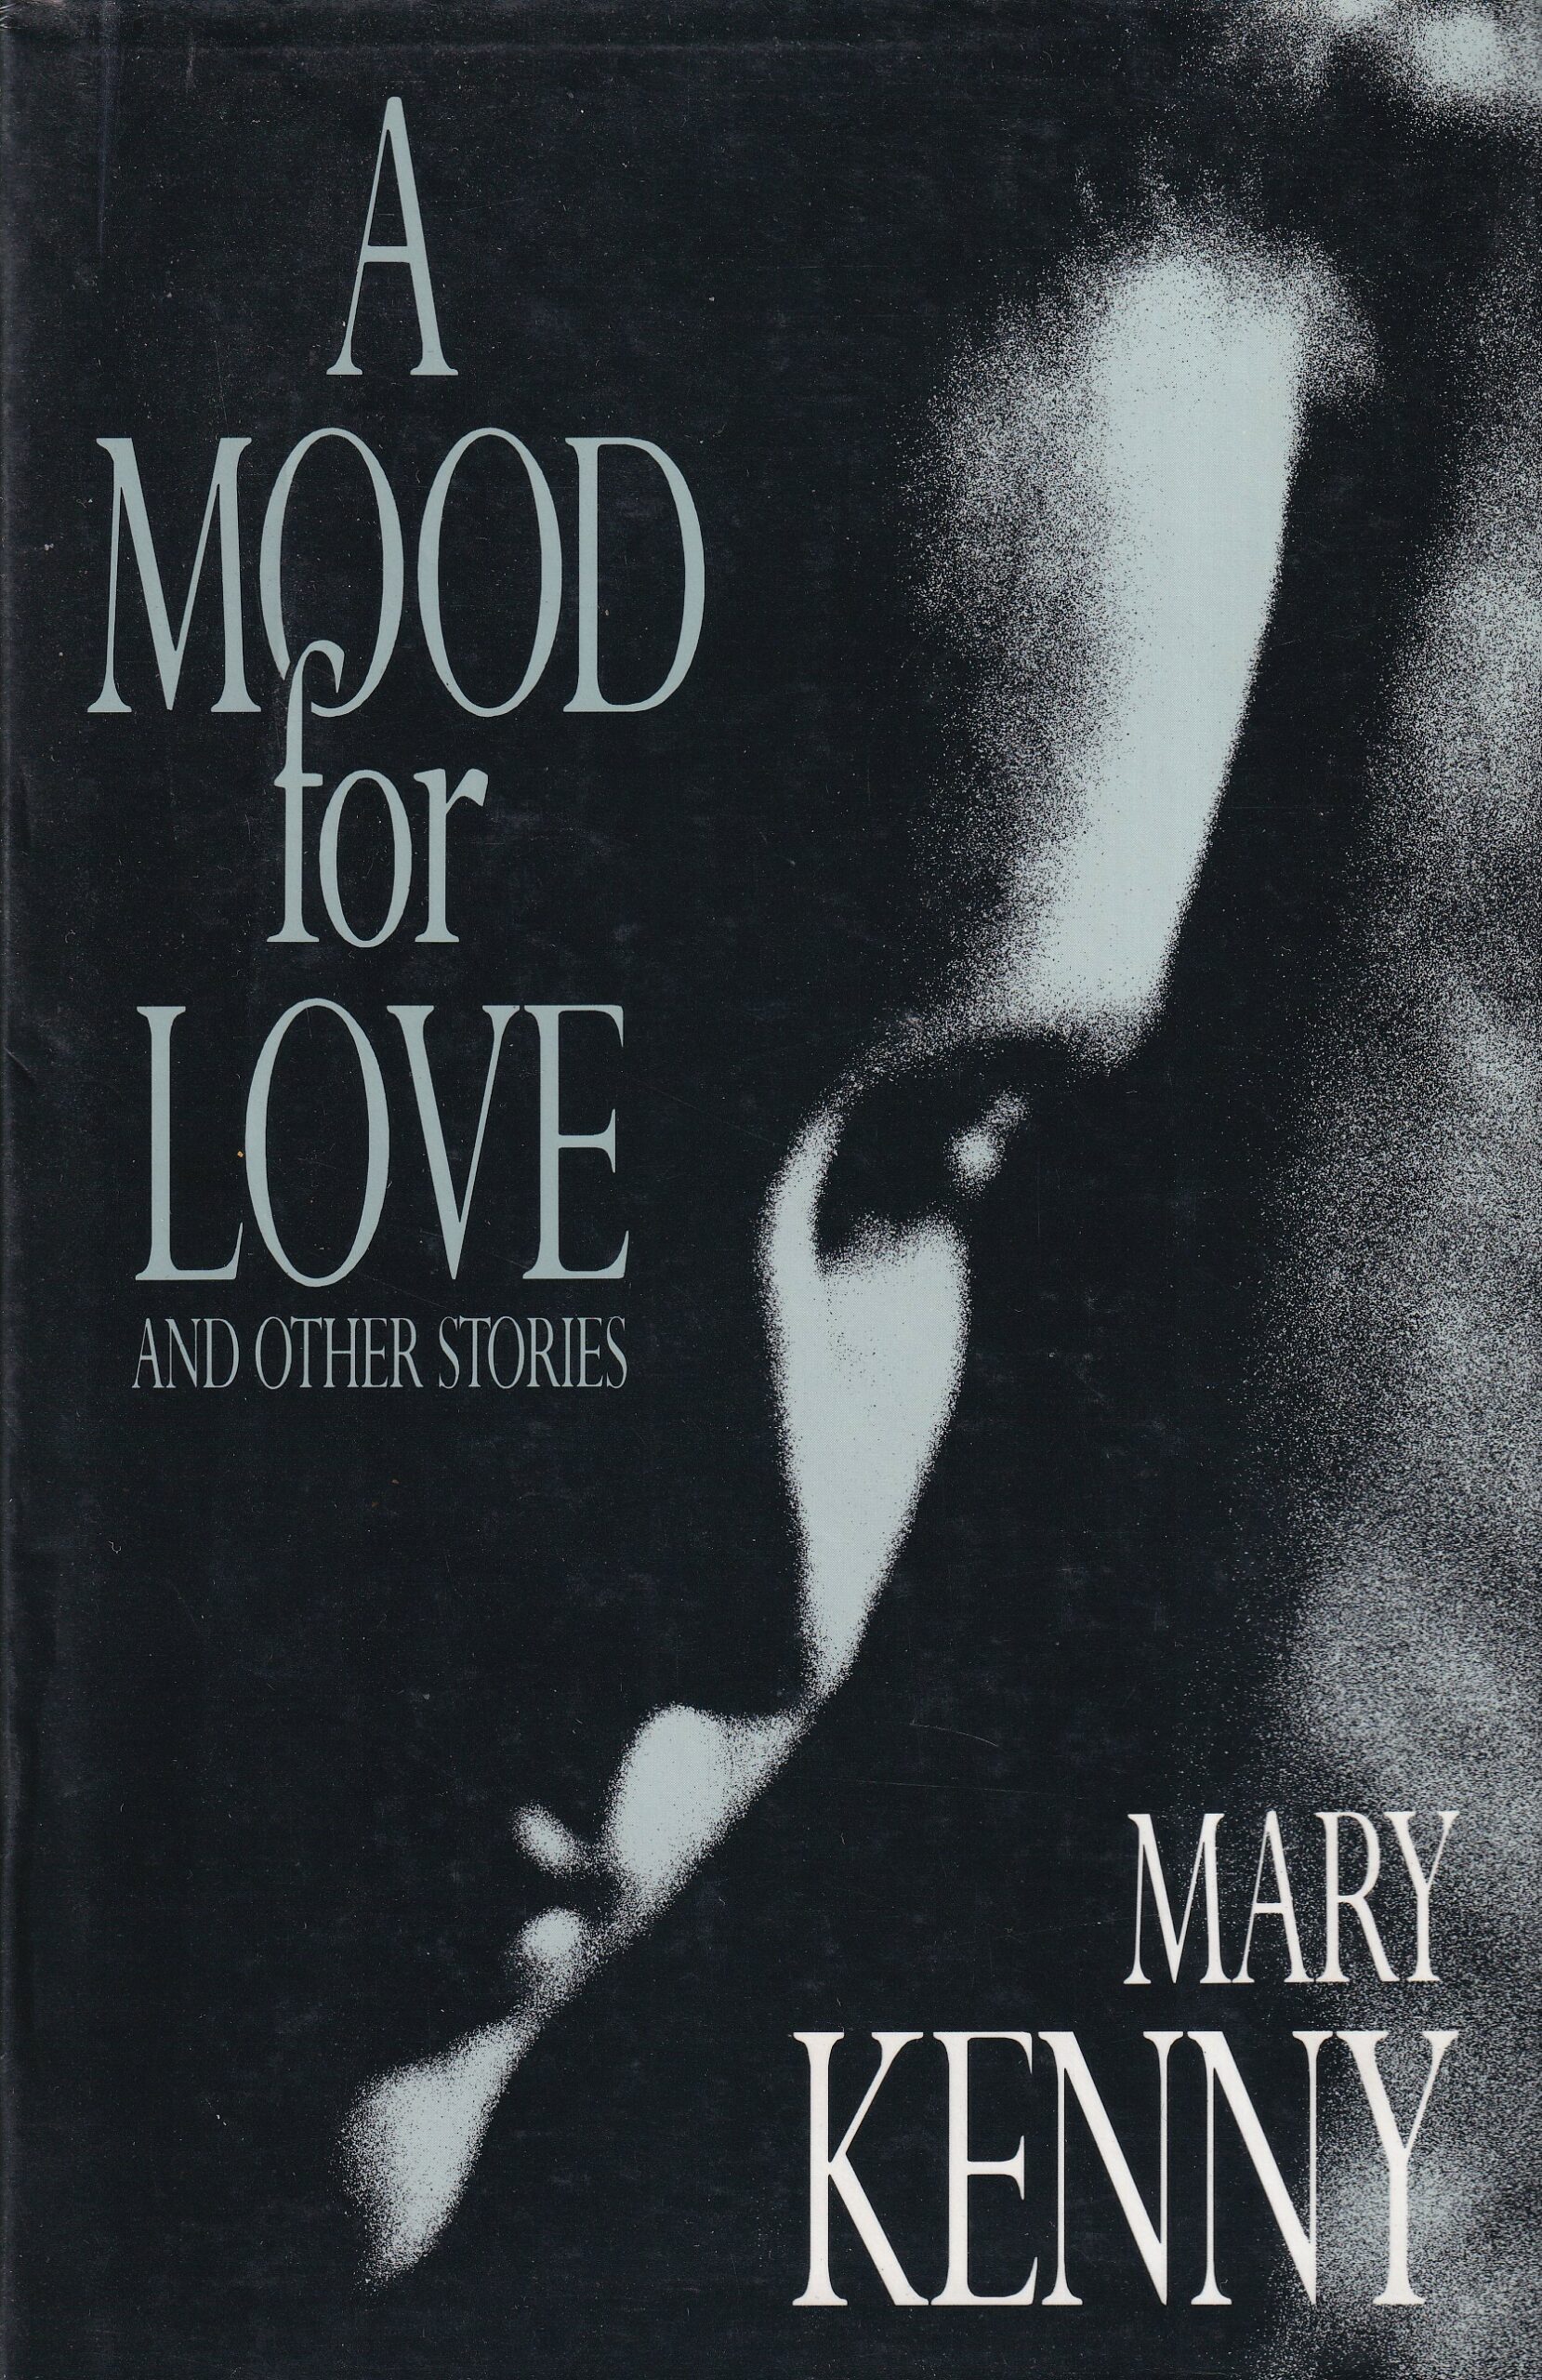 A Mood for Love and Other Stories by Mary Kenny